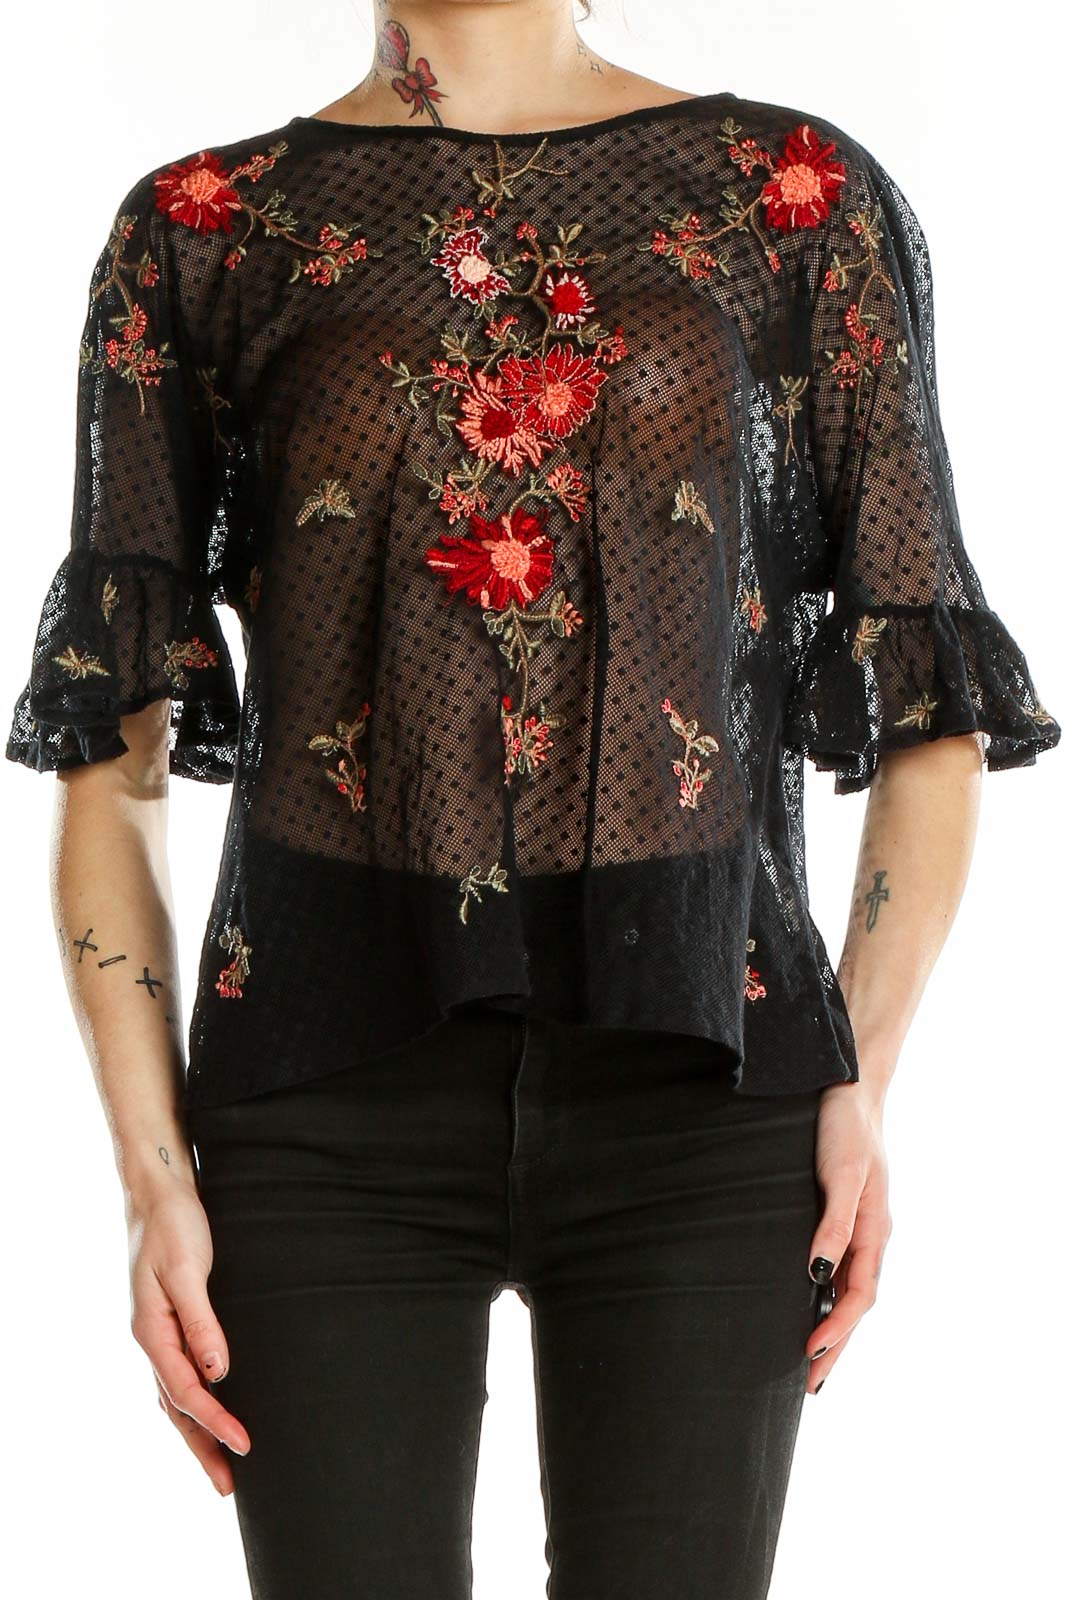 Black Semi-Sheer Floral Lace Top Front